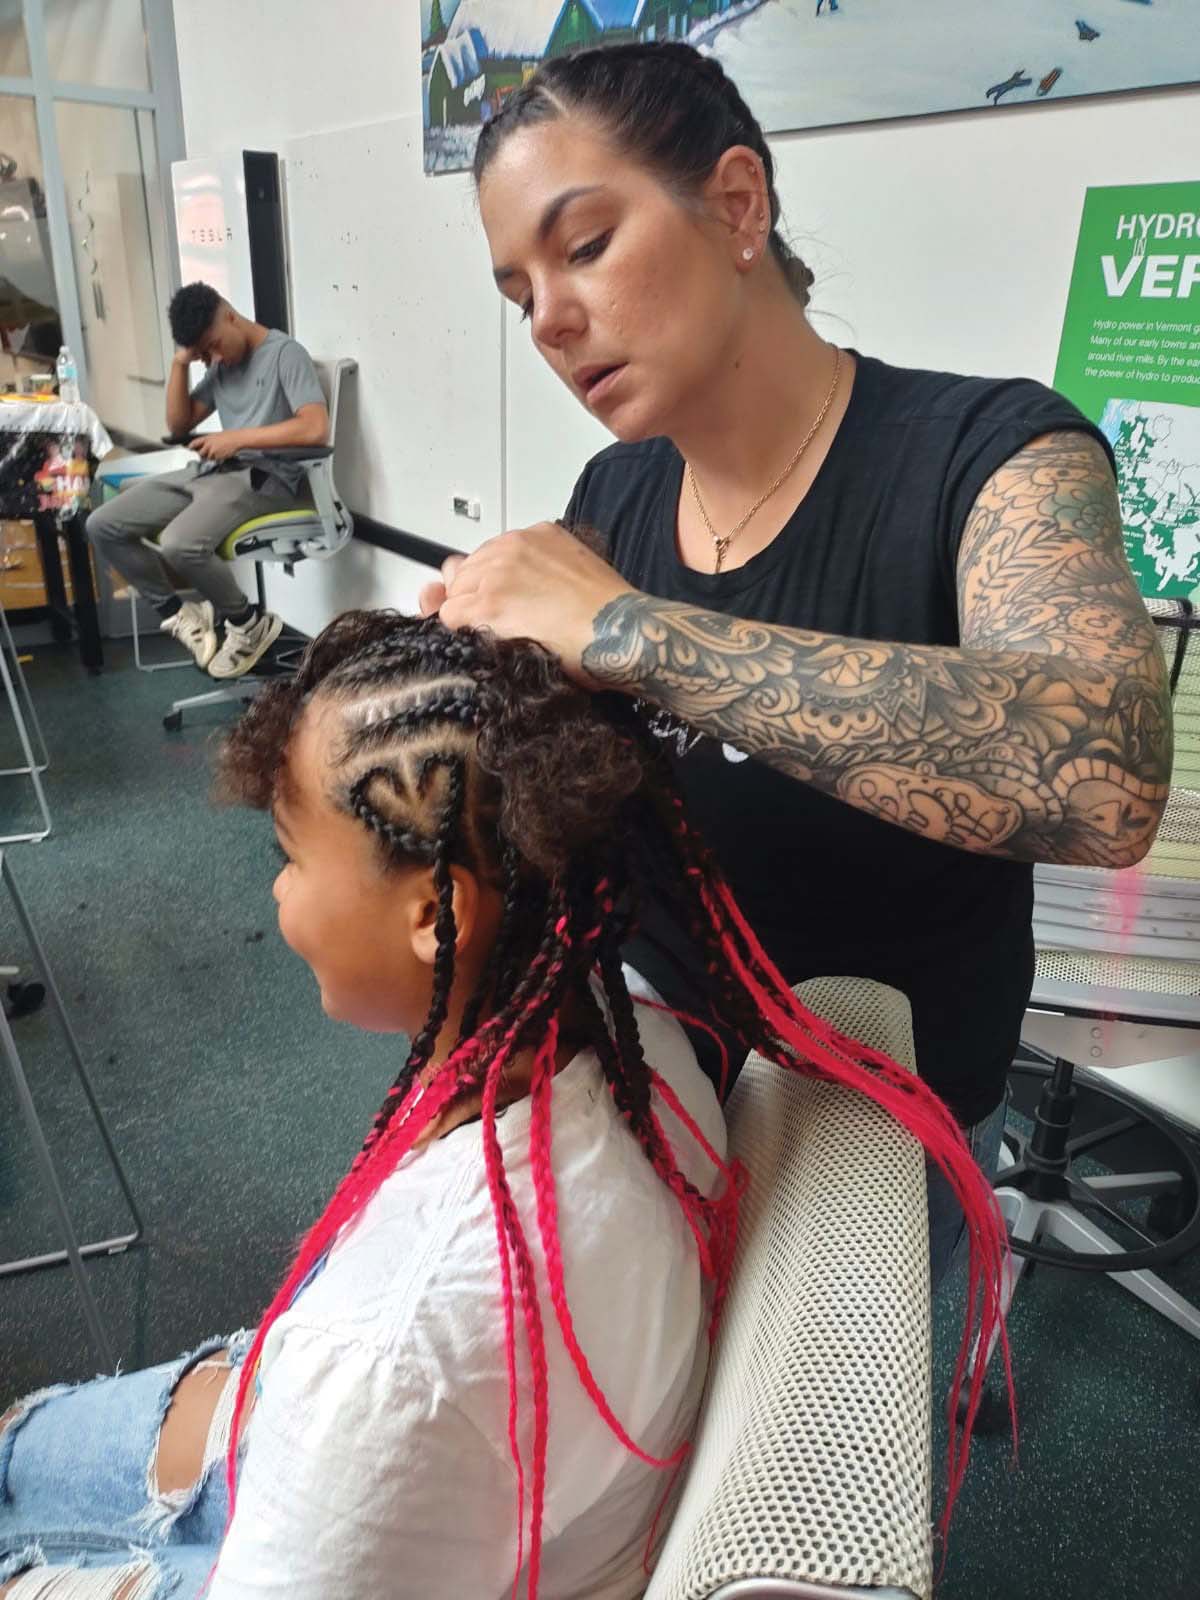 BIPOC hair clinic seeks to fill a need